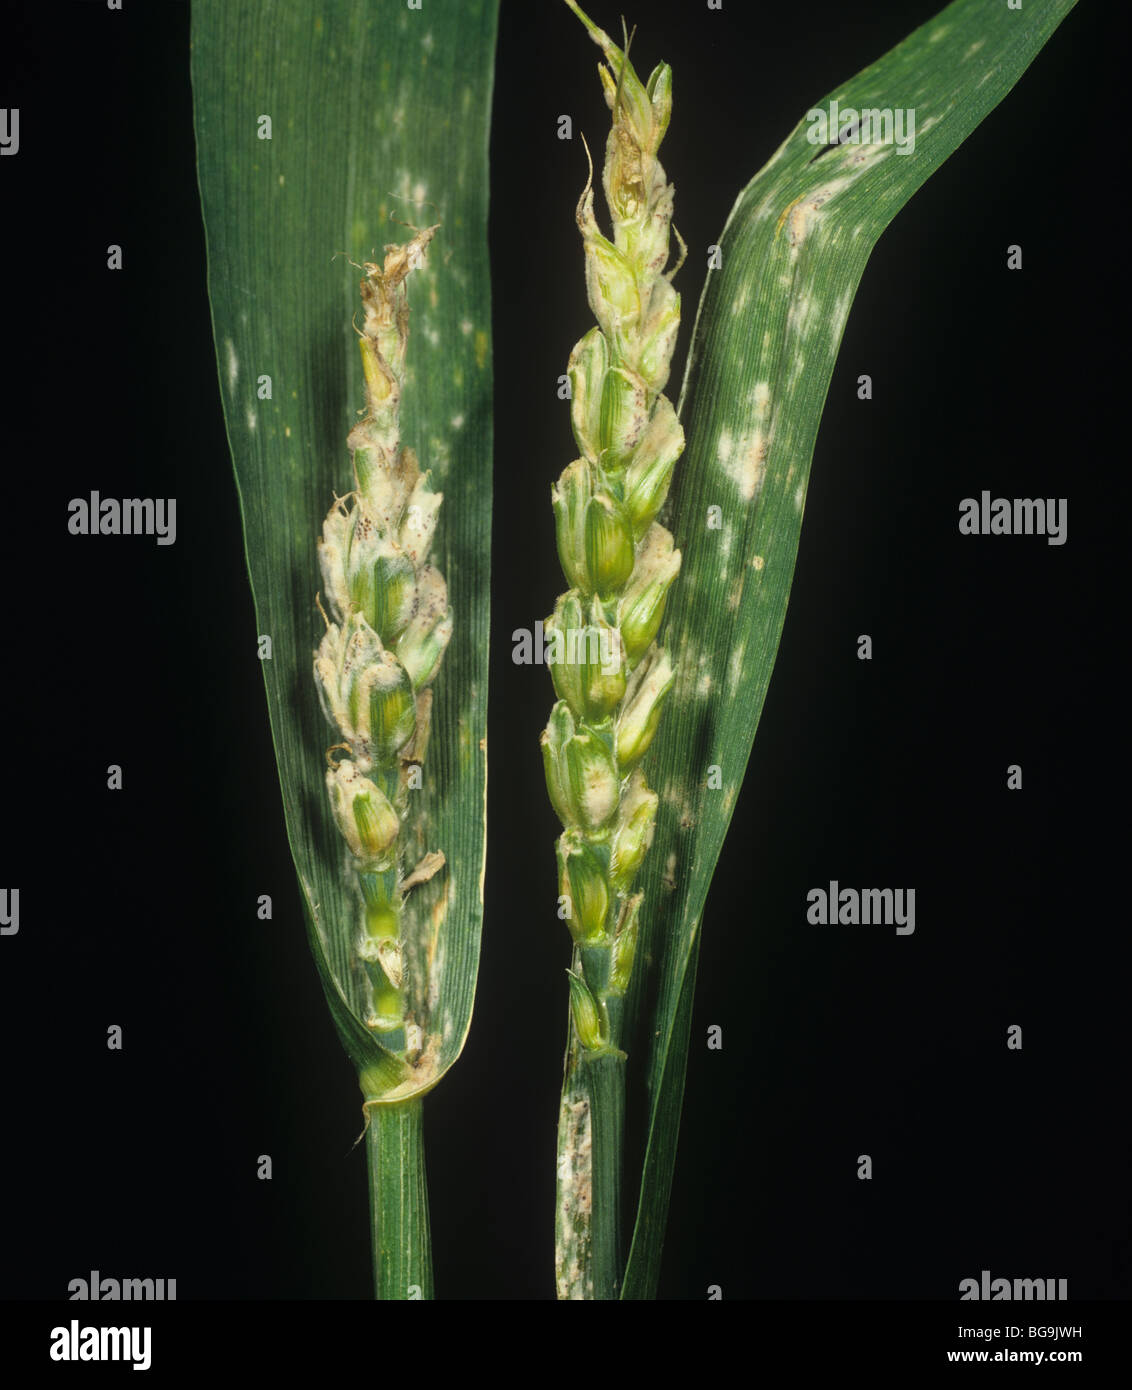 Powdery mildew (Erysiphe graminis f.sp. tritici) aborted ear and flagleaf infection on wheat plants Stock Photo